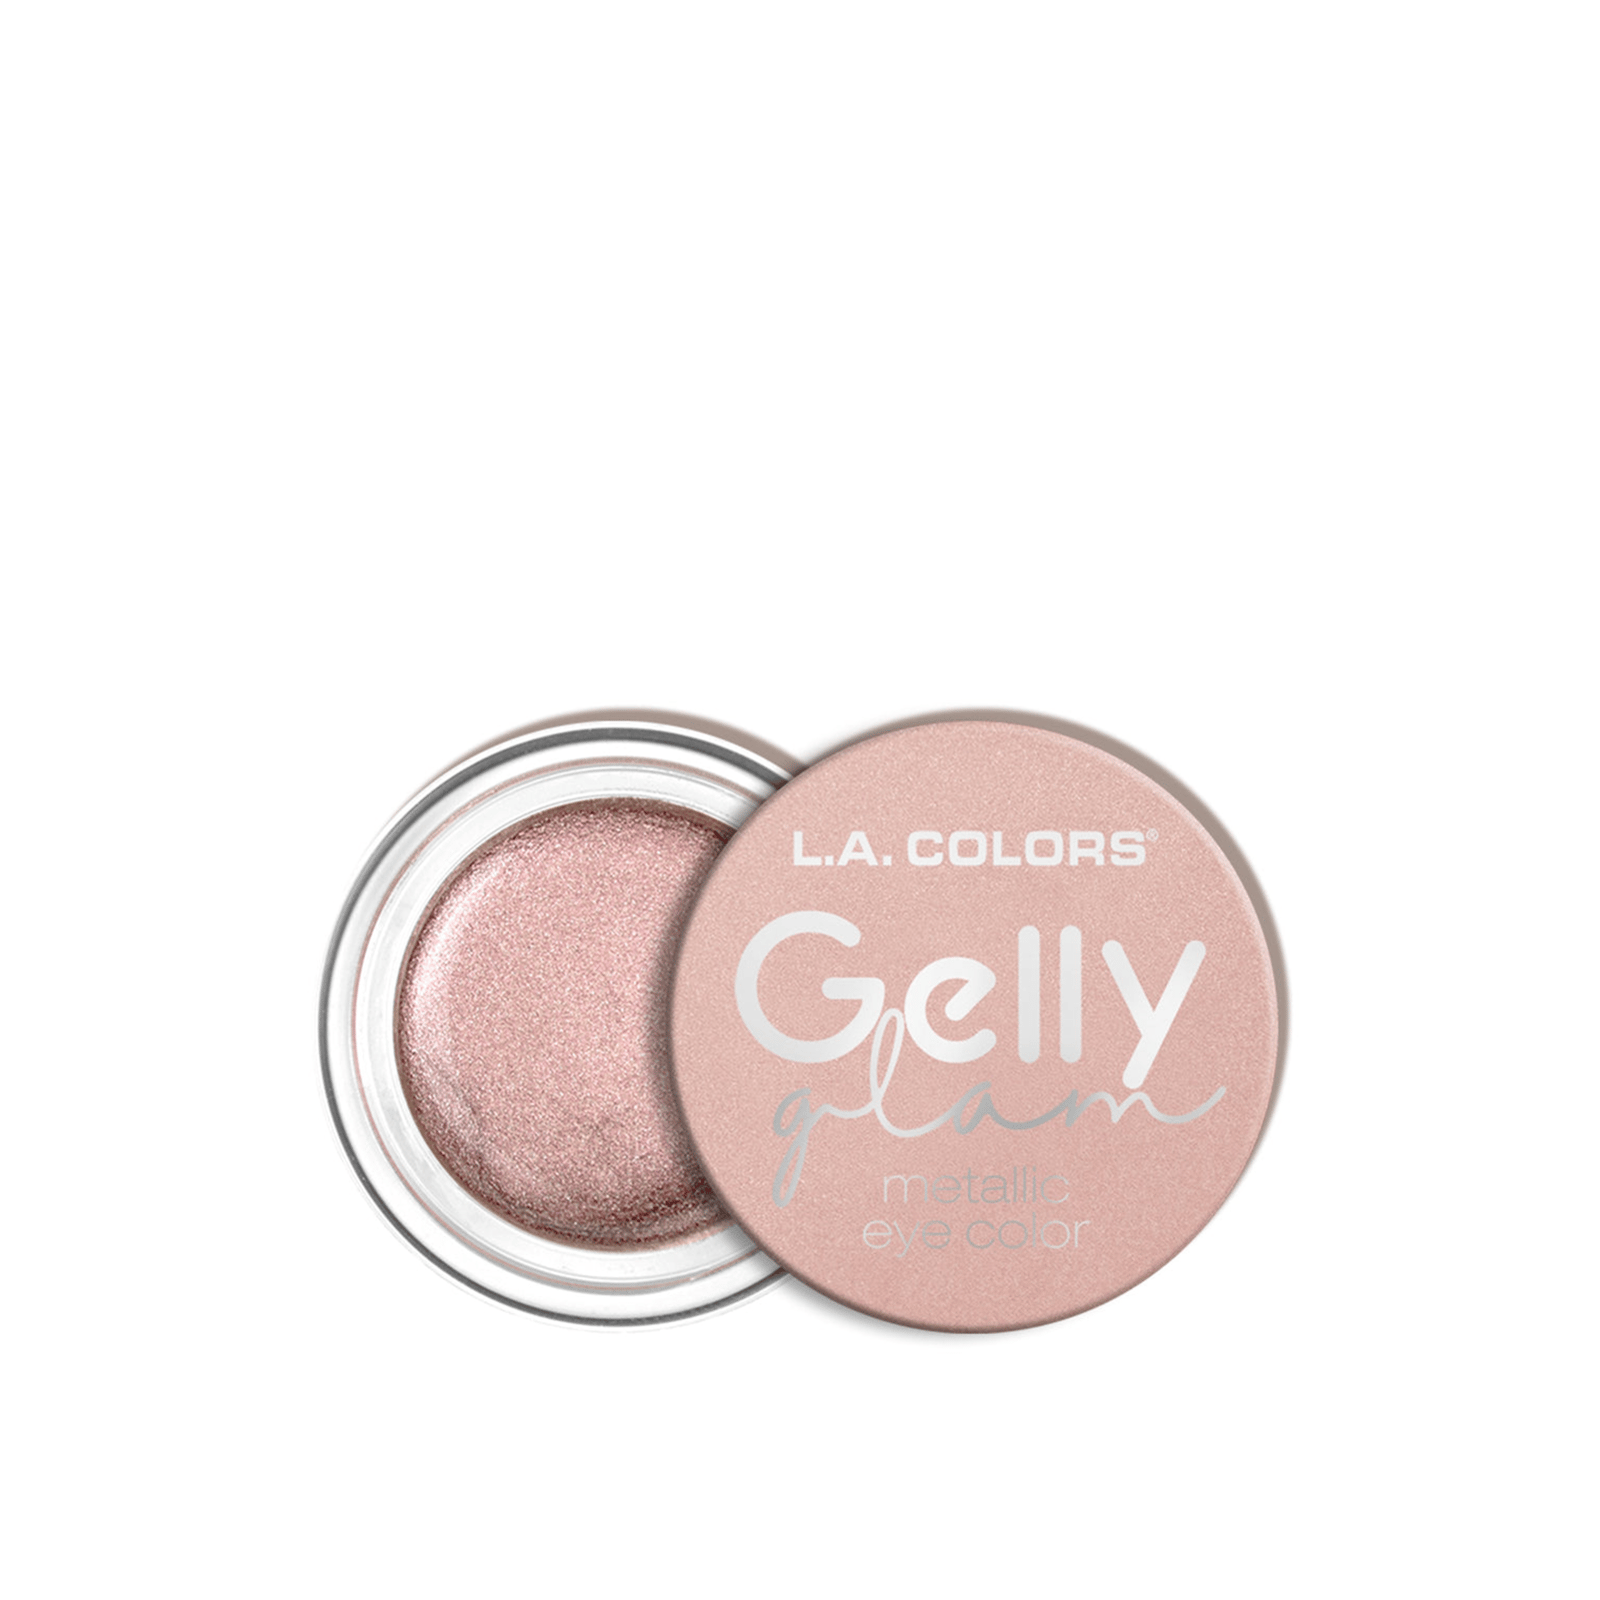 L.A Colors Gelly Glam Metallic Eye Color CES284 Lush 5ml